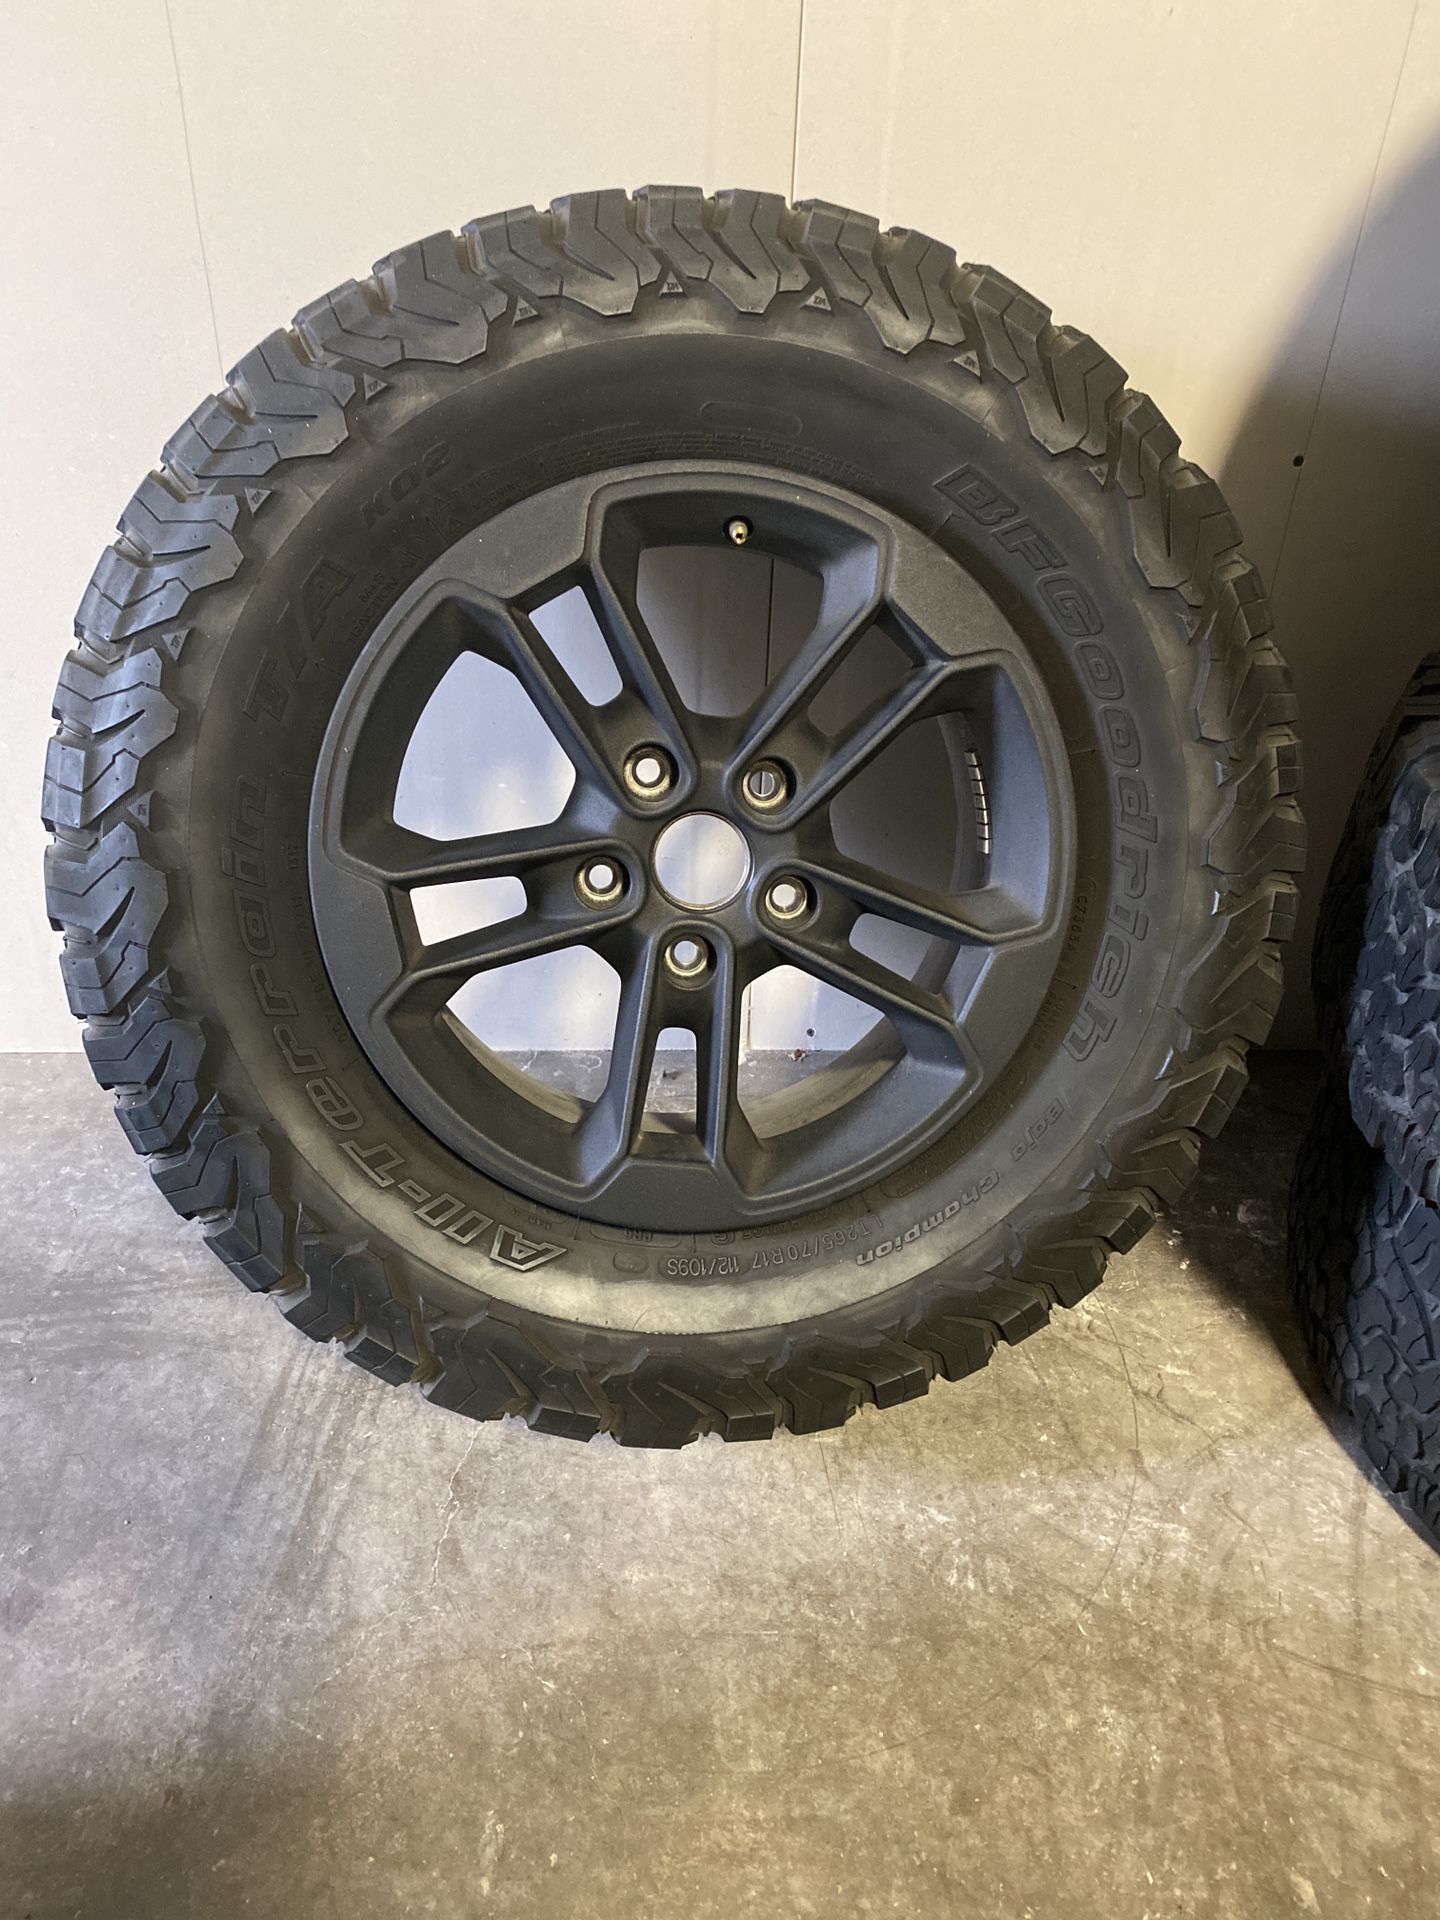 Jeep wheels and tires. All 5 available